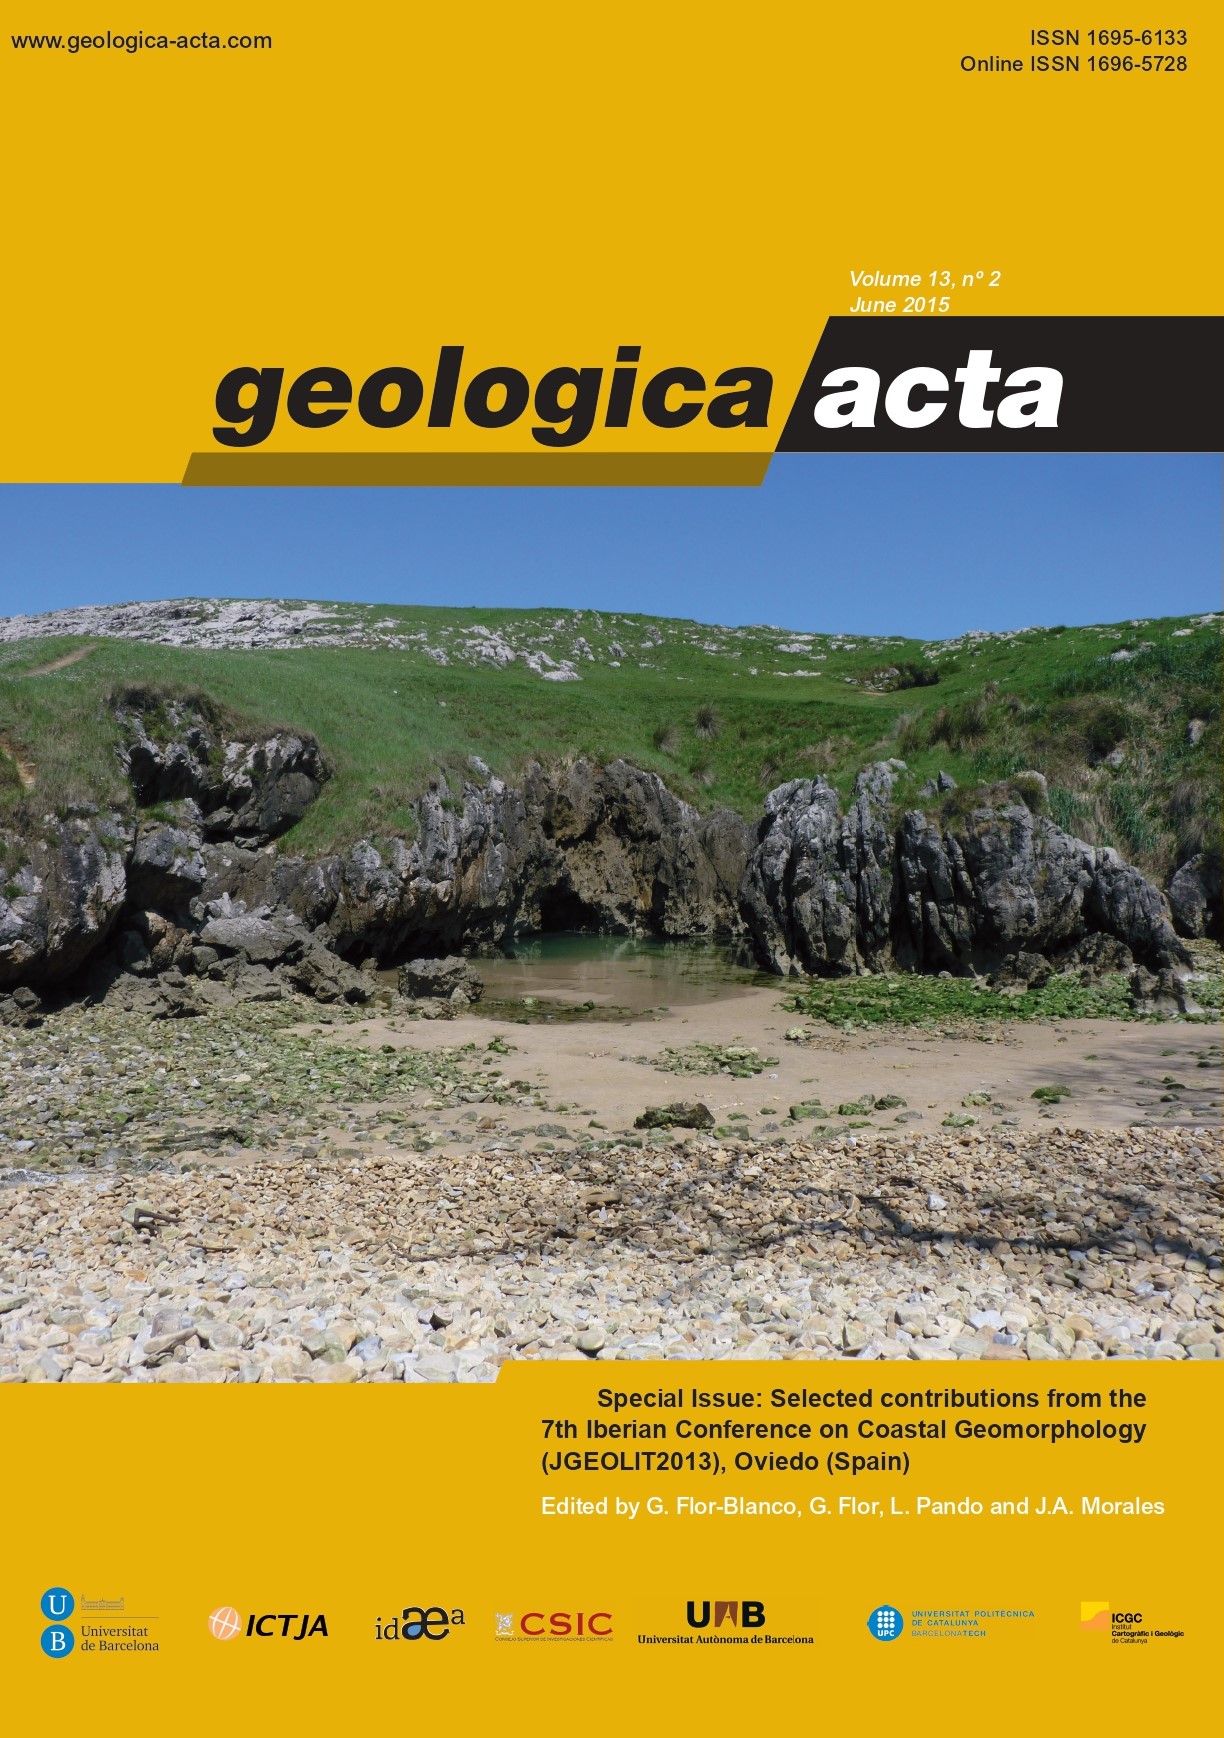 					View Vol. 13 No. 2 (2015): Selected contributions from the 7th Iberian Conference on Coastal Geomorphology (JGEOLIT2013), Oviedo (Spain)
				